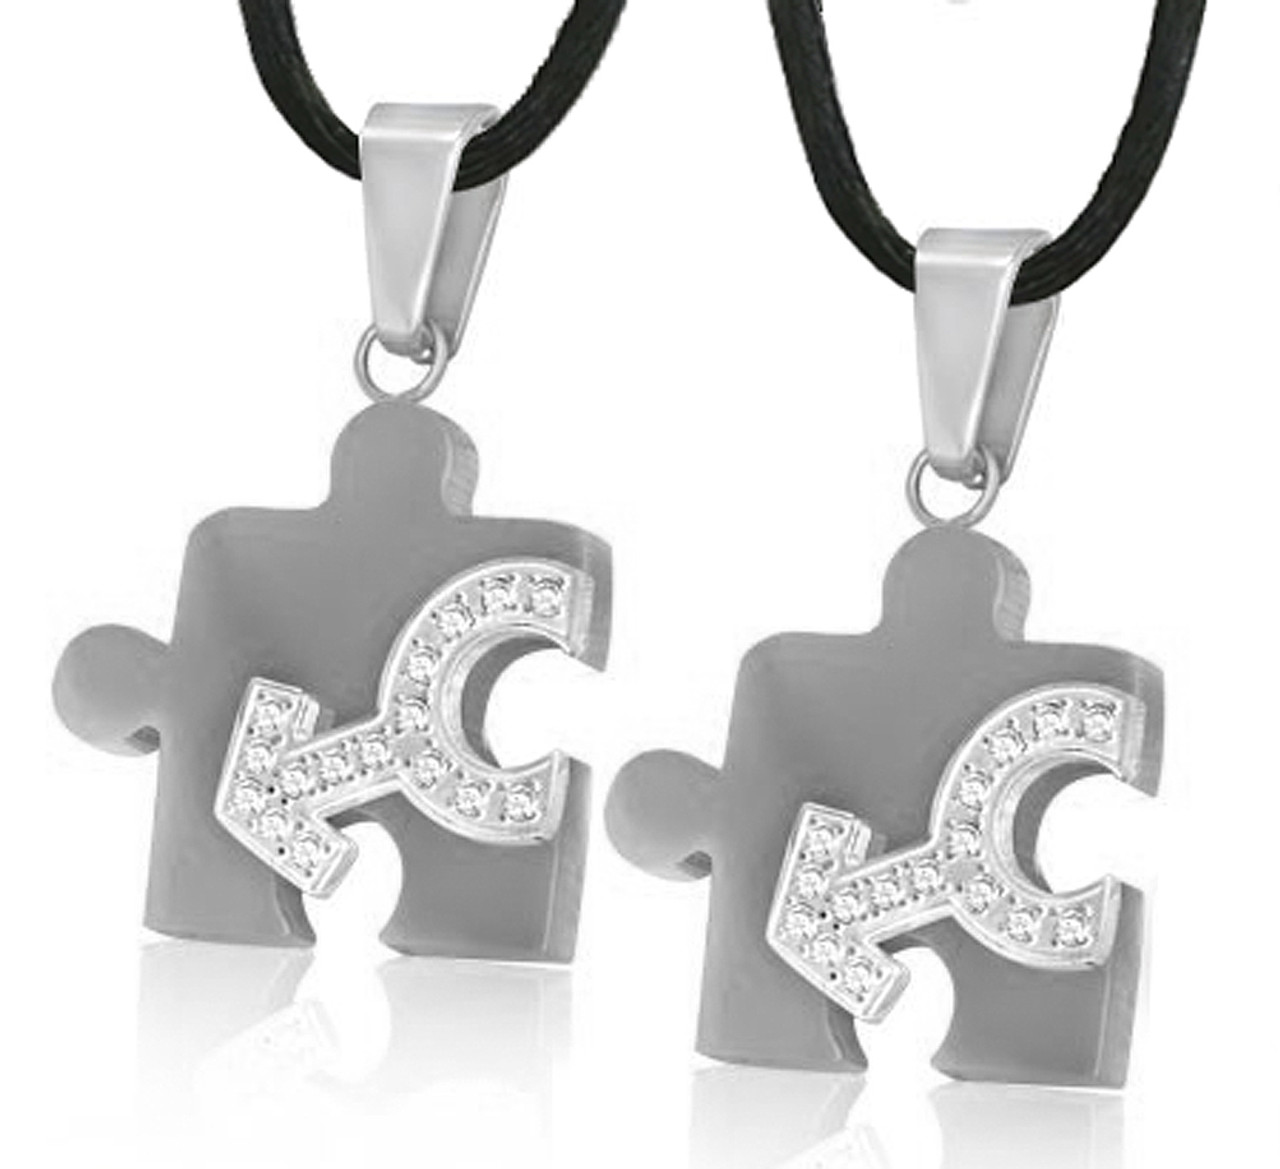 Dropship Couples Necklaces For Men Women Stainless Cord Puzzle